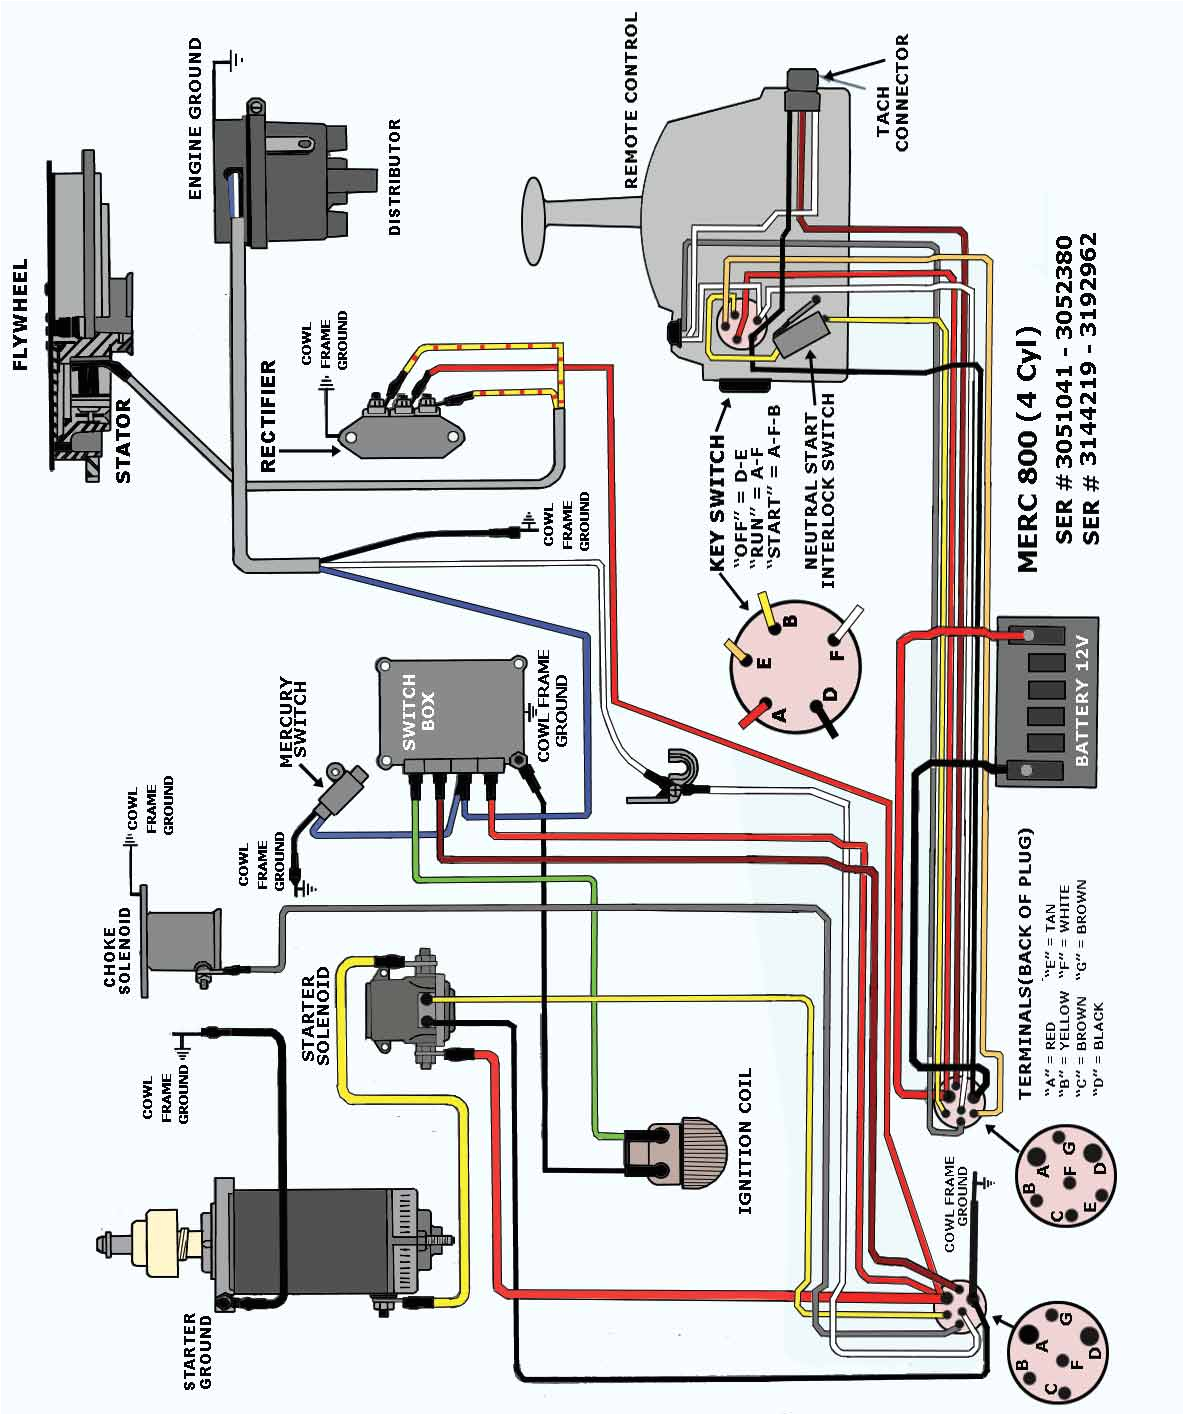 wiring diagram mercury outboard harness with key fob battery adapters for trailers sale radios cars jpg